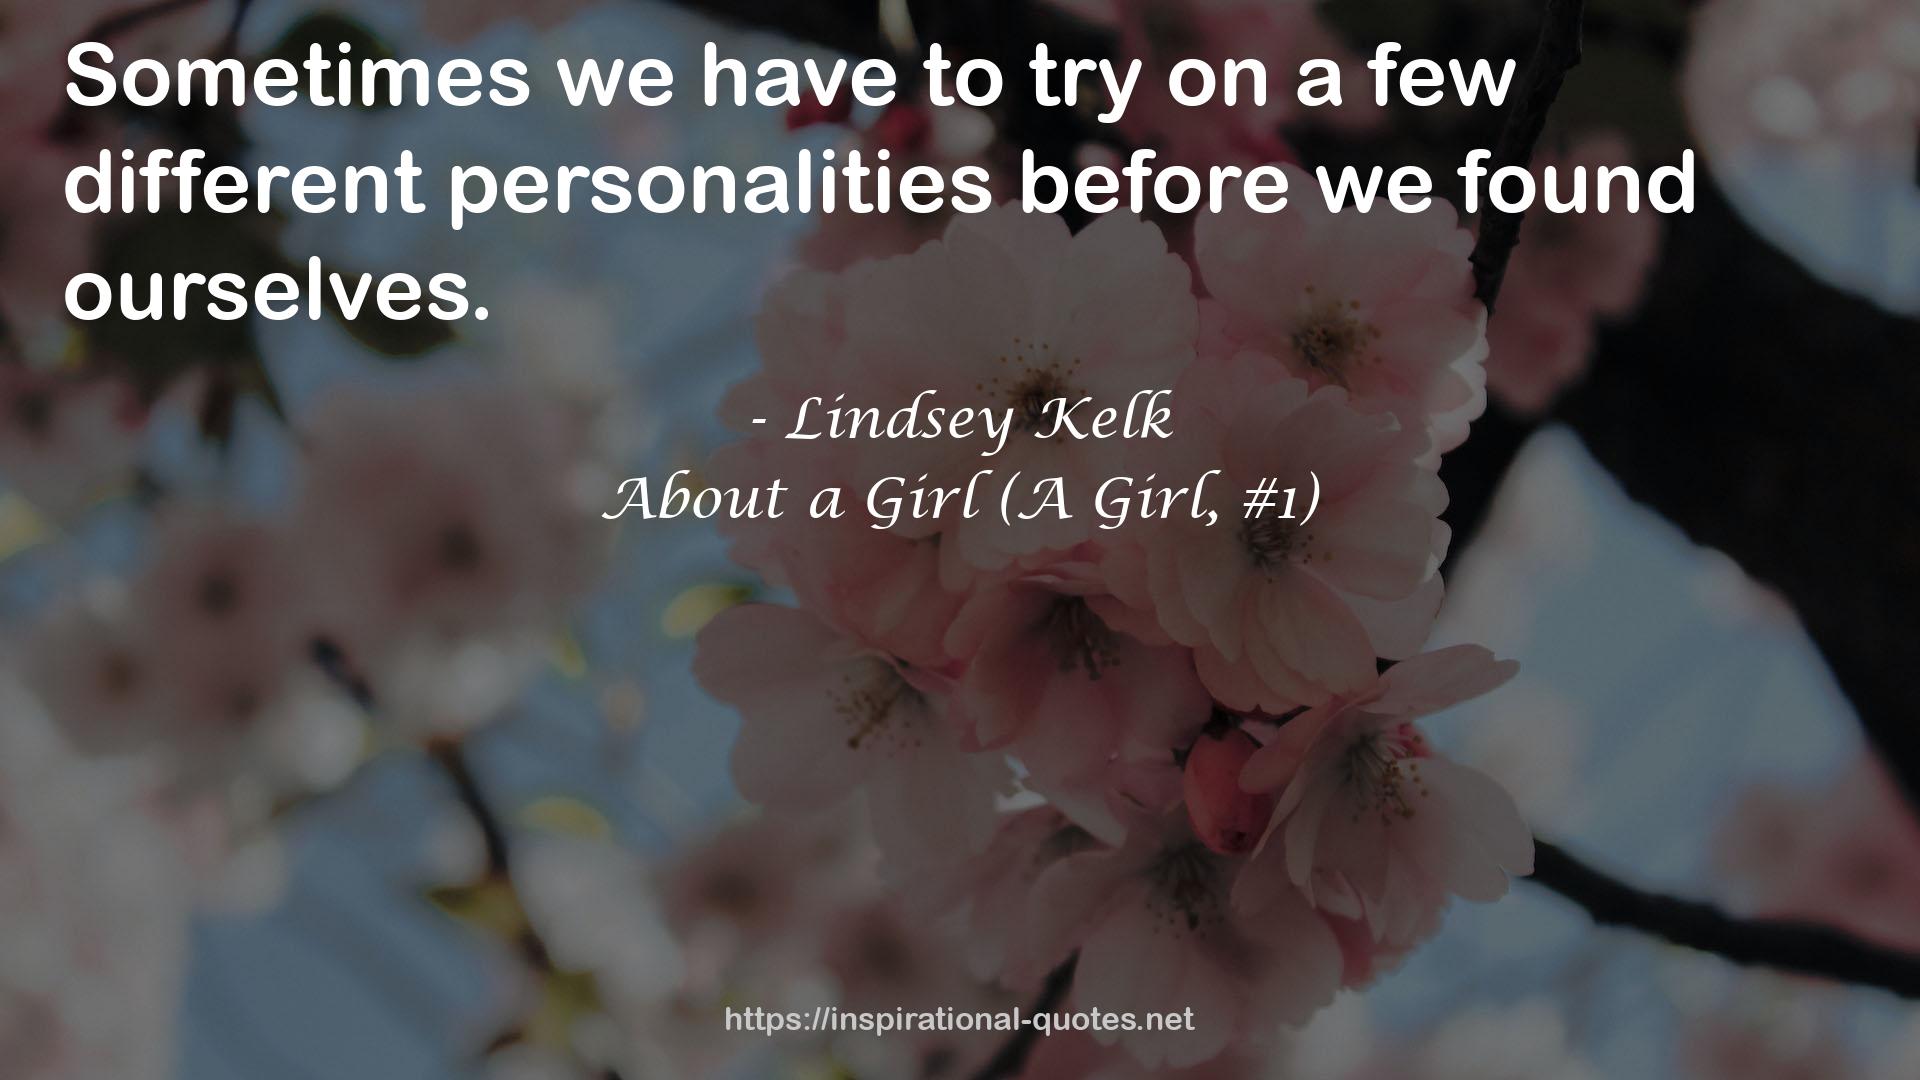 About a Girl (A Girl, #1) QUOTES